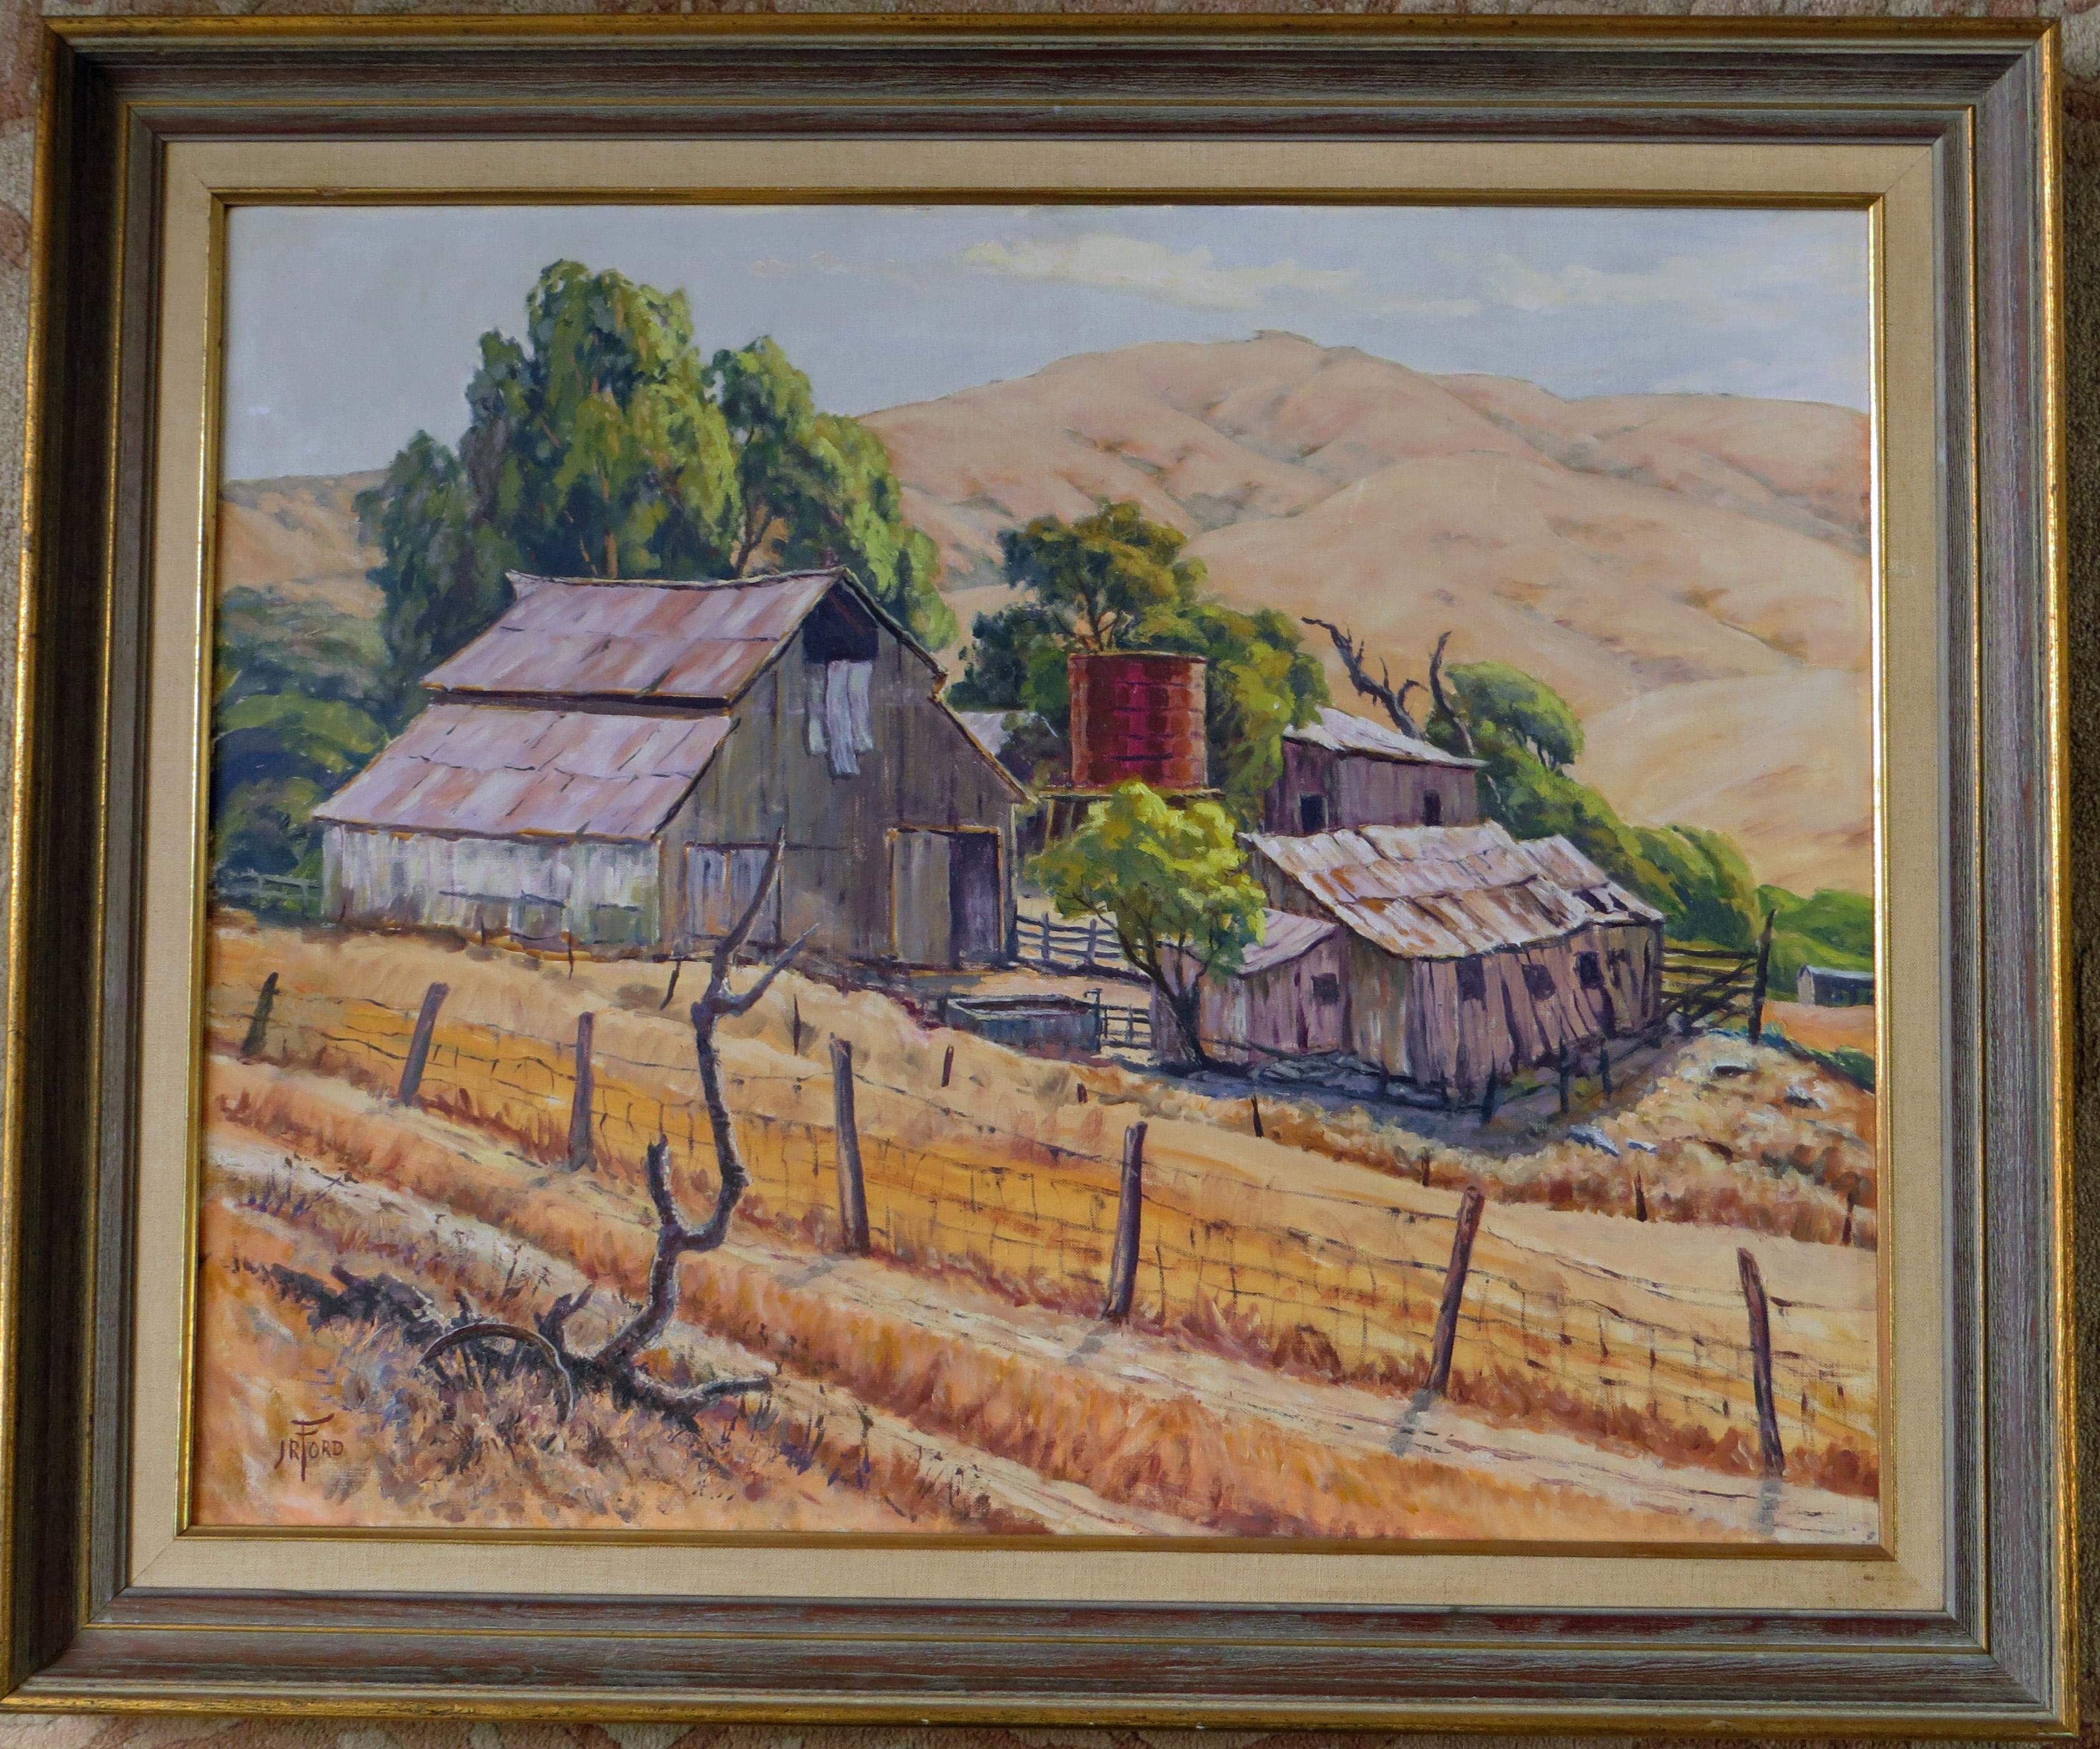  Rancho El Camino in Summer - Painting by James Russell Ford